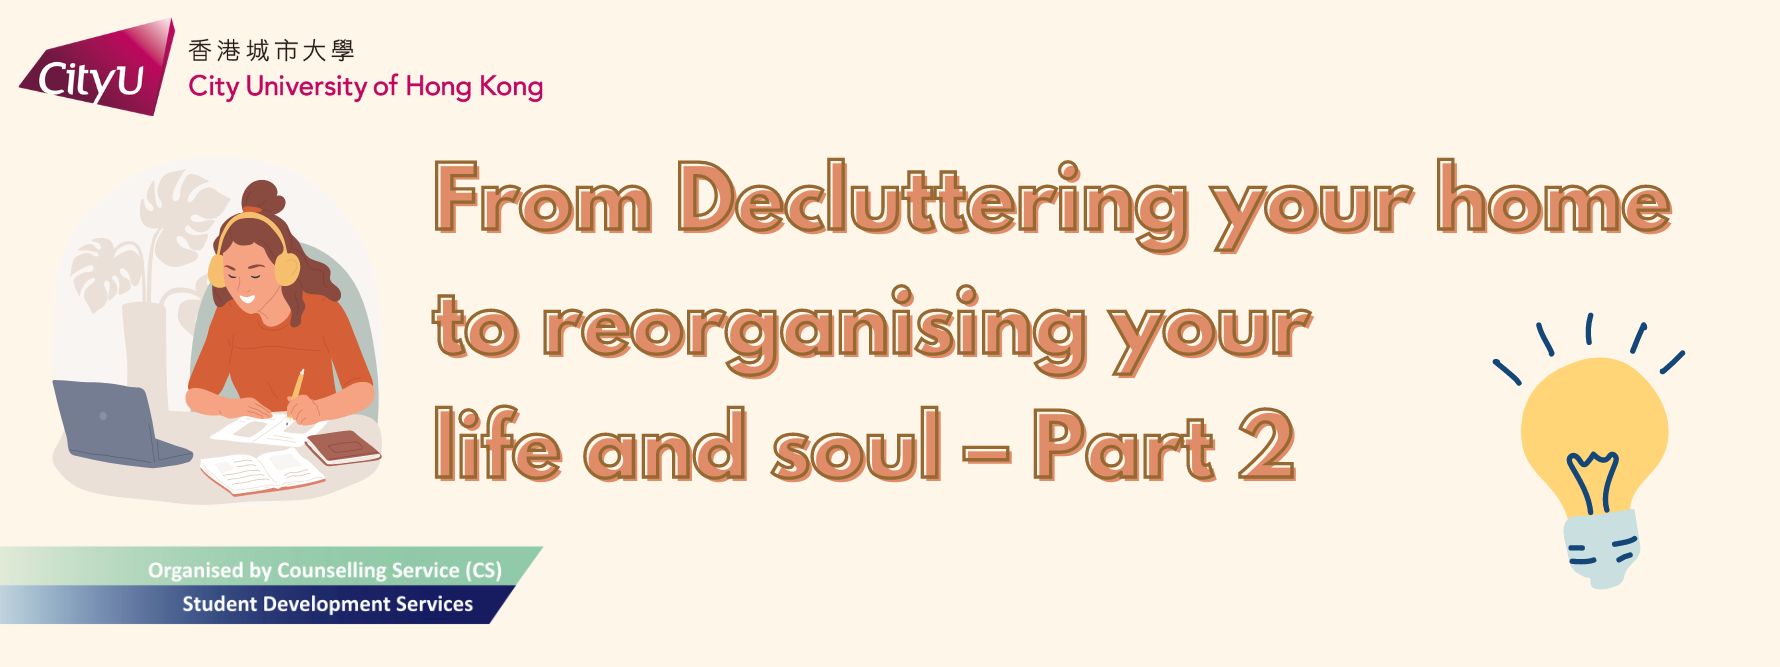 From Decluttering your home to reorganising your life and soul – Part 2